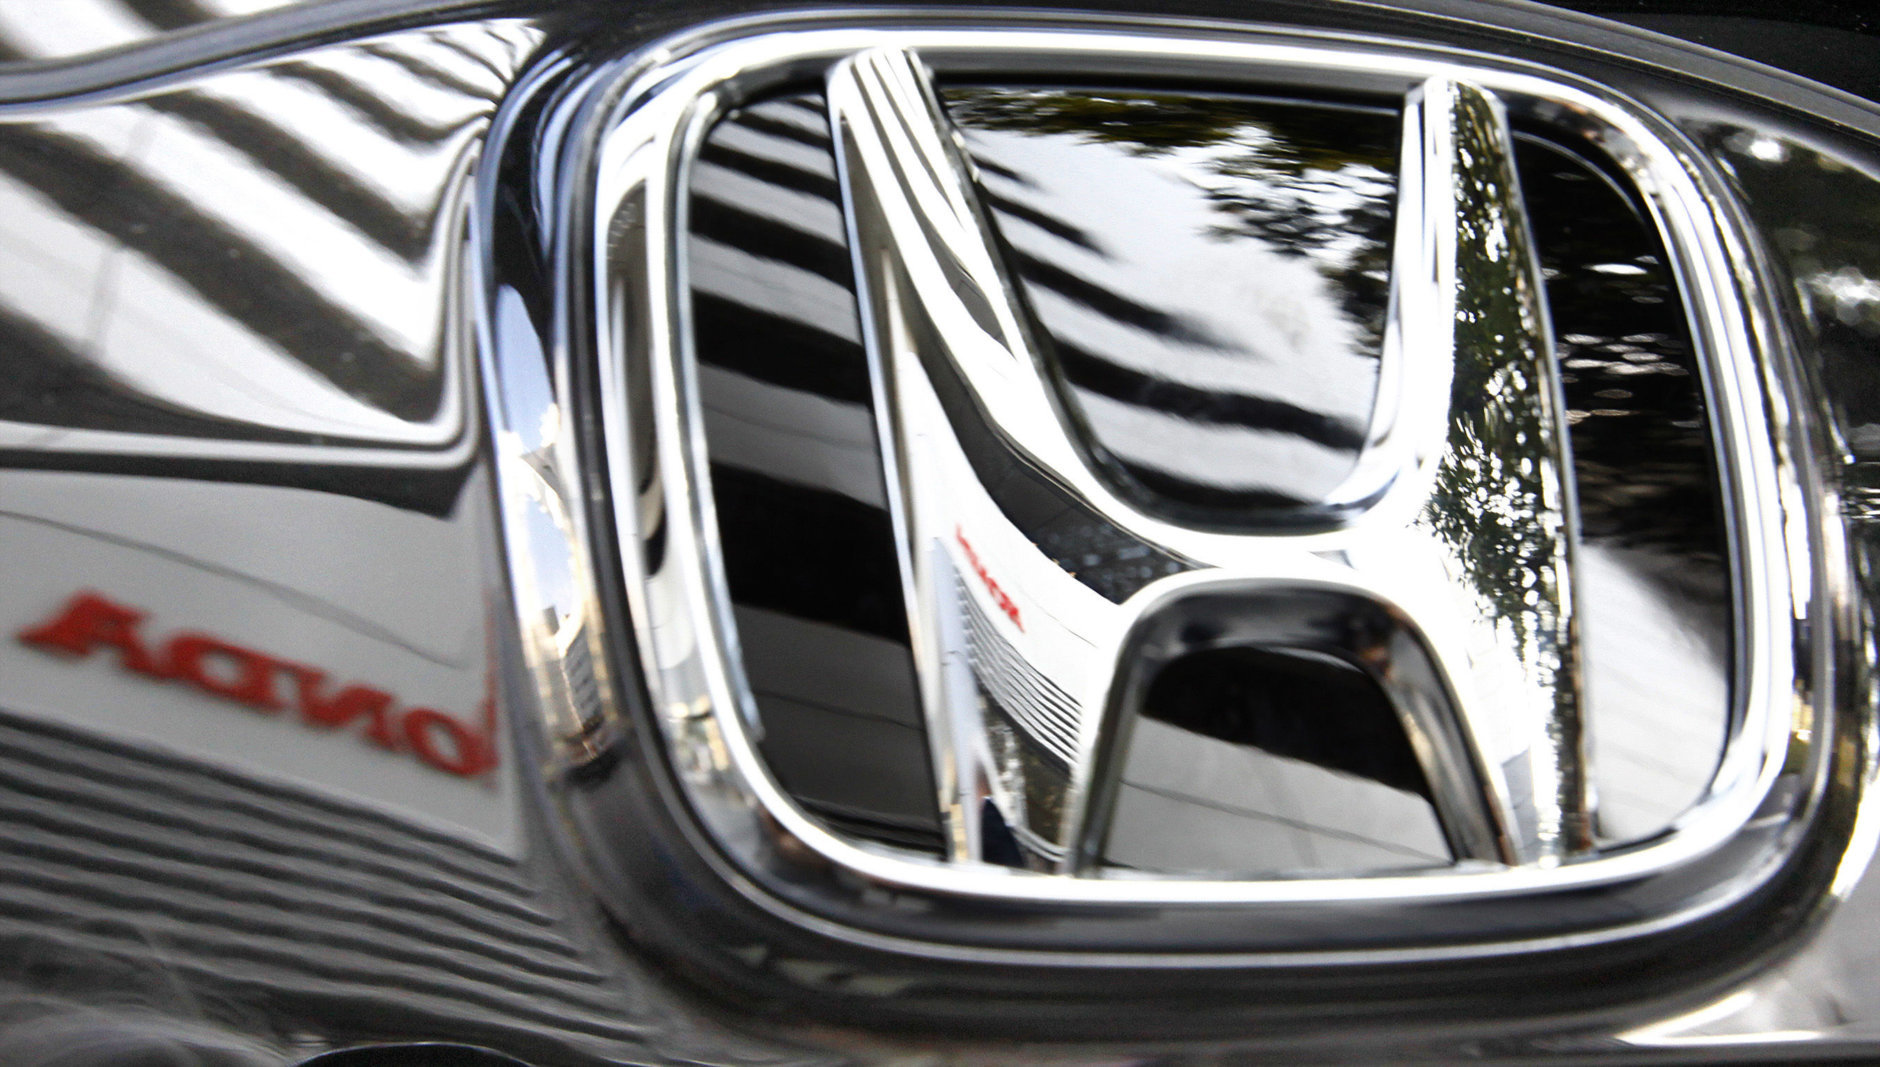 The 1997 Honda Accord was the No. 2 most stolen car overall. In this photo taken Jan. 21, 2010, Honda Motor Co.'s headquarter building is reflected on Honda's car logo in Tokyo, Japan. Honda is aiming to double its global auto sales to more than 6 million vehicles over the next five years as the Japanese automaker gears up for ambitious growth after bouncing back from last year's disasters. "We have now reached the stage of going on the offensive," Honda President Takanobu Ito told reporters Friday, Sept. 21, 2012 as he announced his worldwide target for the fiscal year ending March 2017. The automaker sold 3.1 million vehicles for the fiscal year through March 2012. (AP Photo/Shizuo Kambayashi)